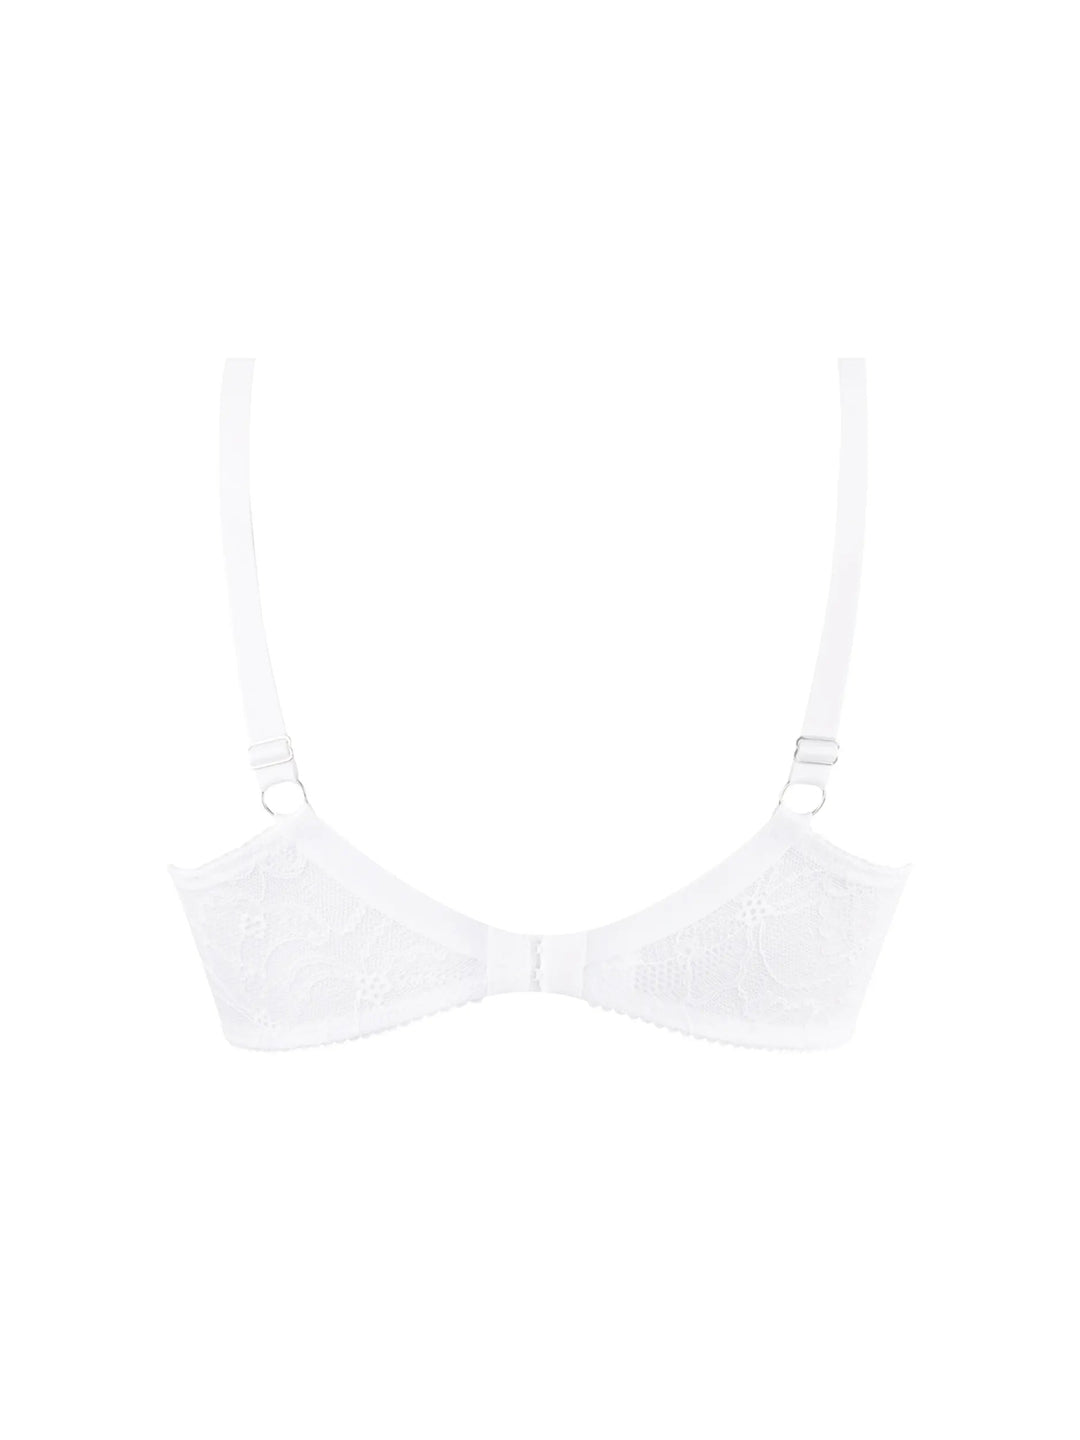 Lise Charmel - Feerie Couture 3 Parts Full Cup Blanc Full Cup Bra Lise Charmel 